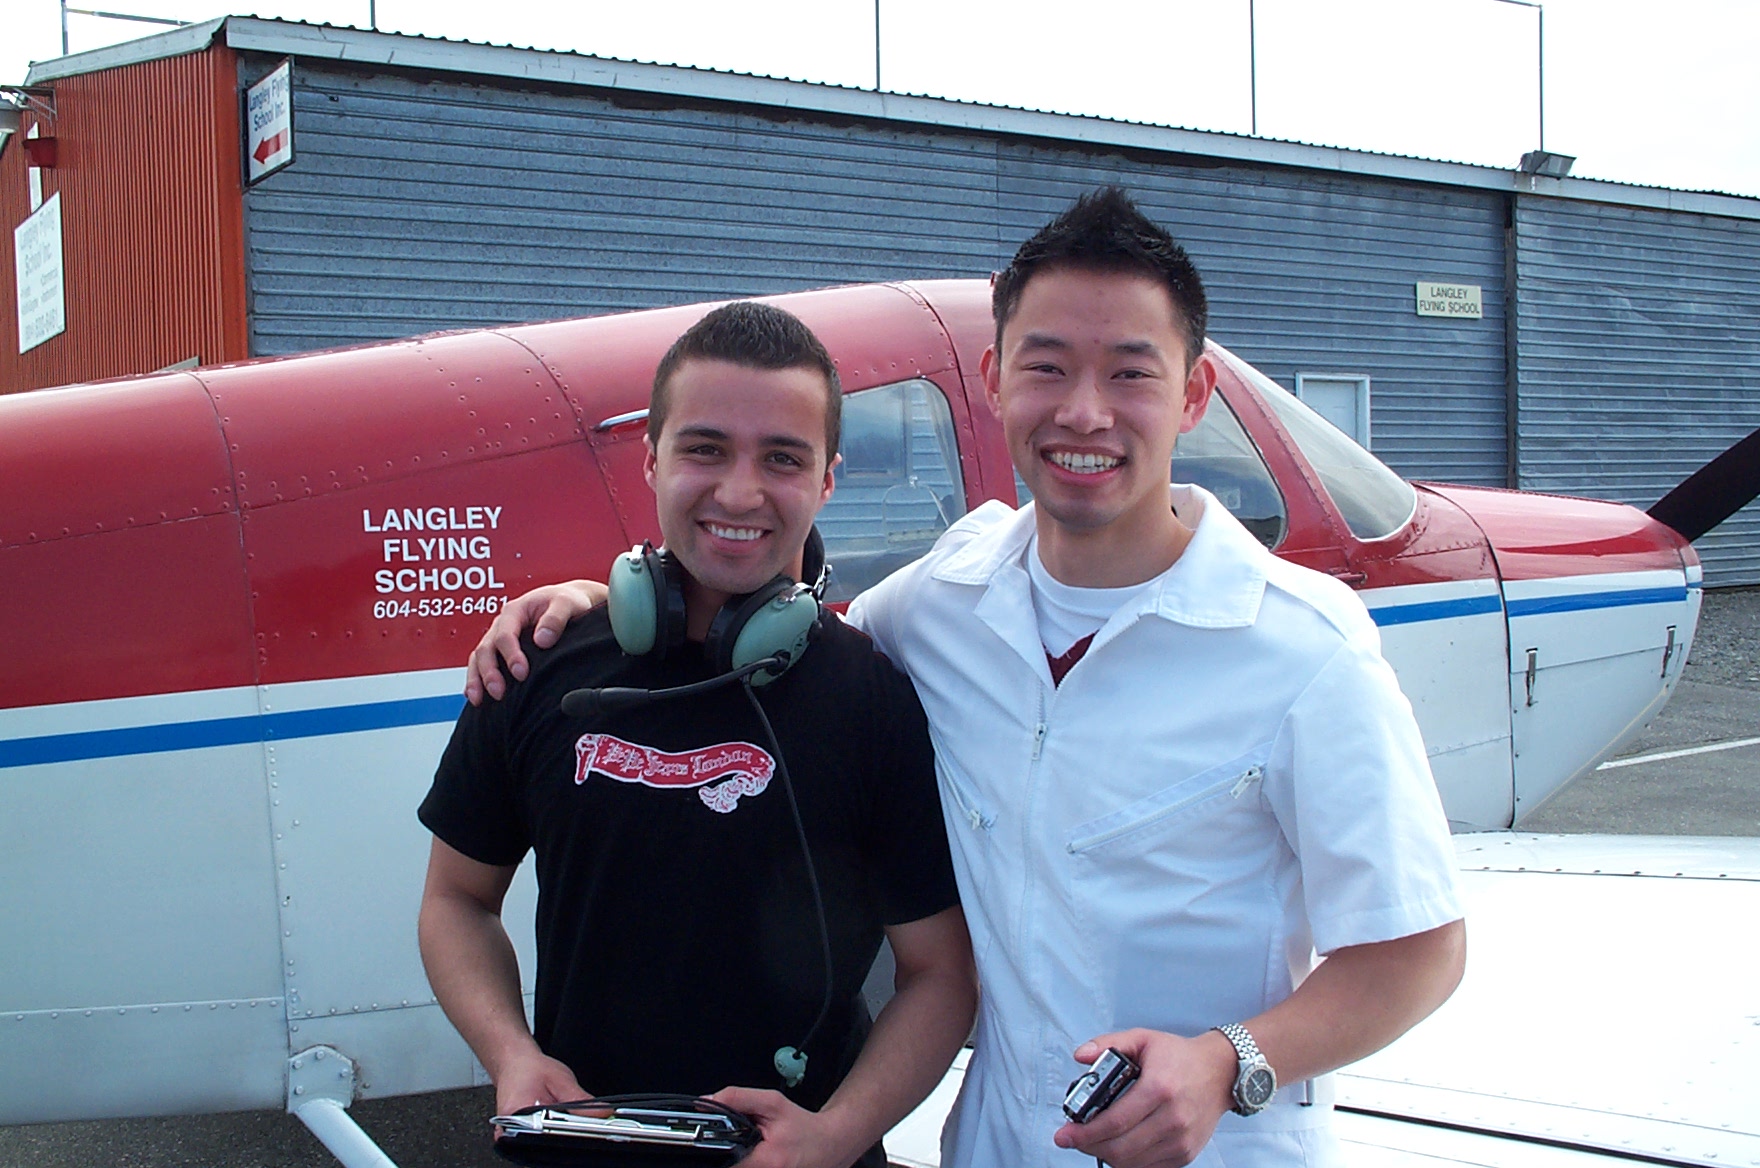 Andres Angulo with his Flight Instructor Nam Vu after completing his First Solo Flight on April 14, 2010.  Langley Flying School.